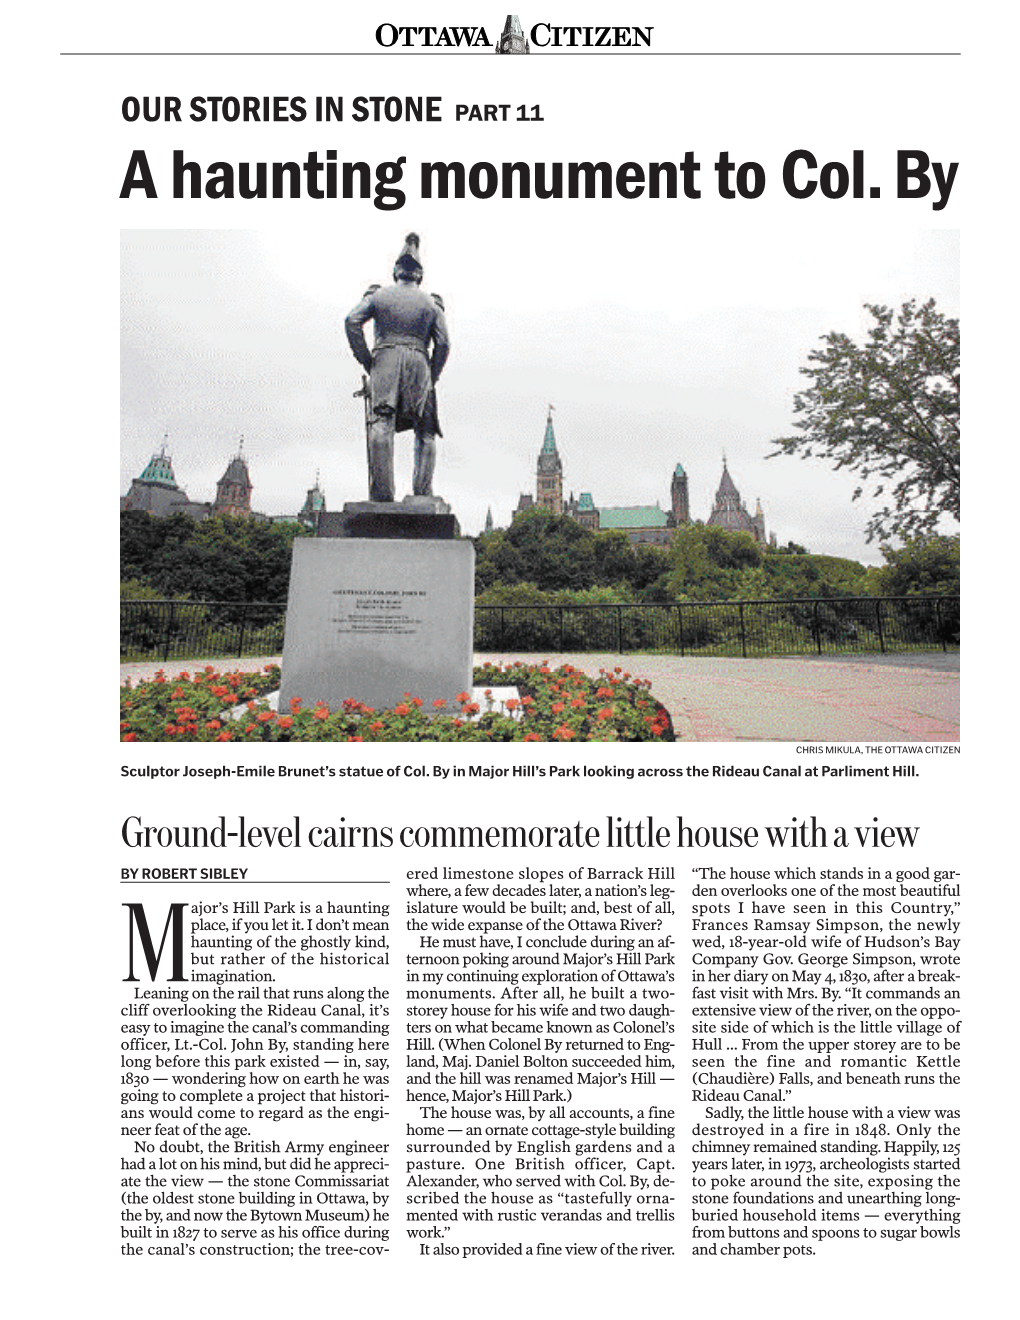 A Haunting Monument to Col. By